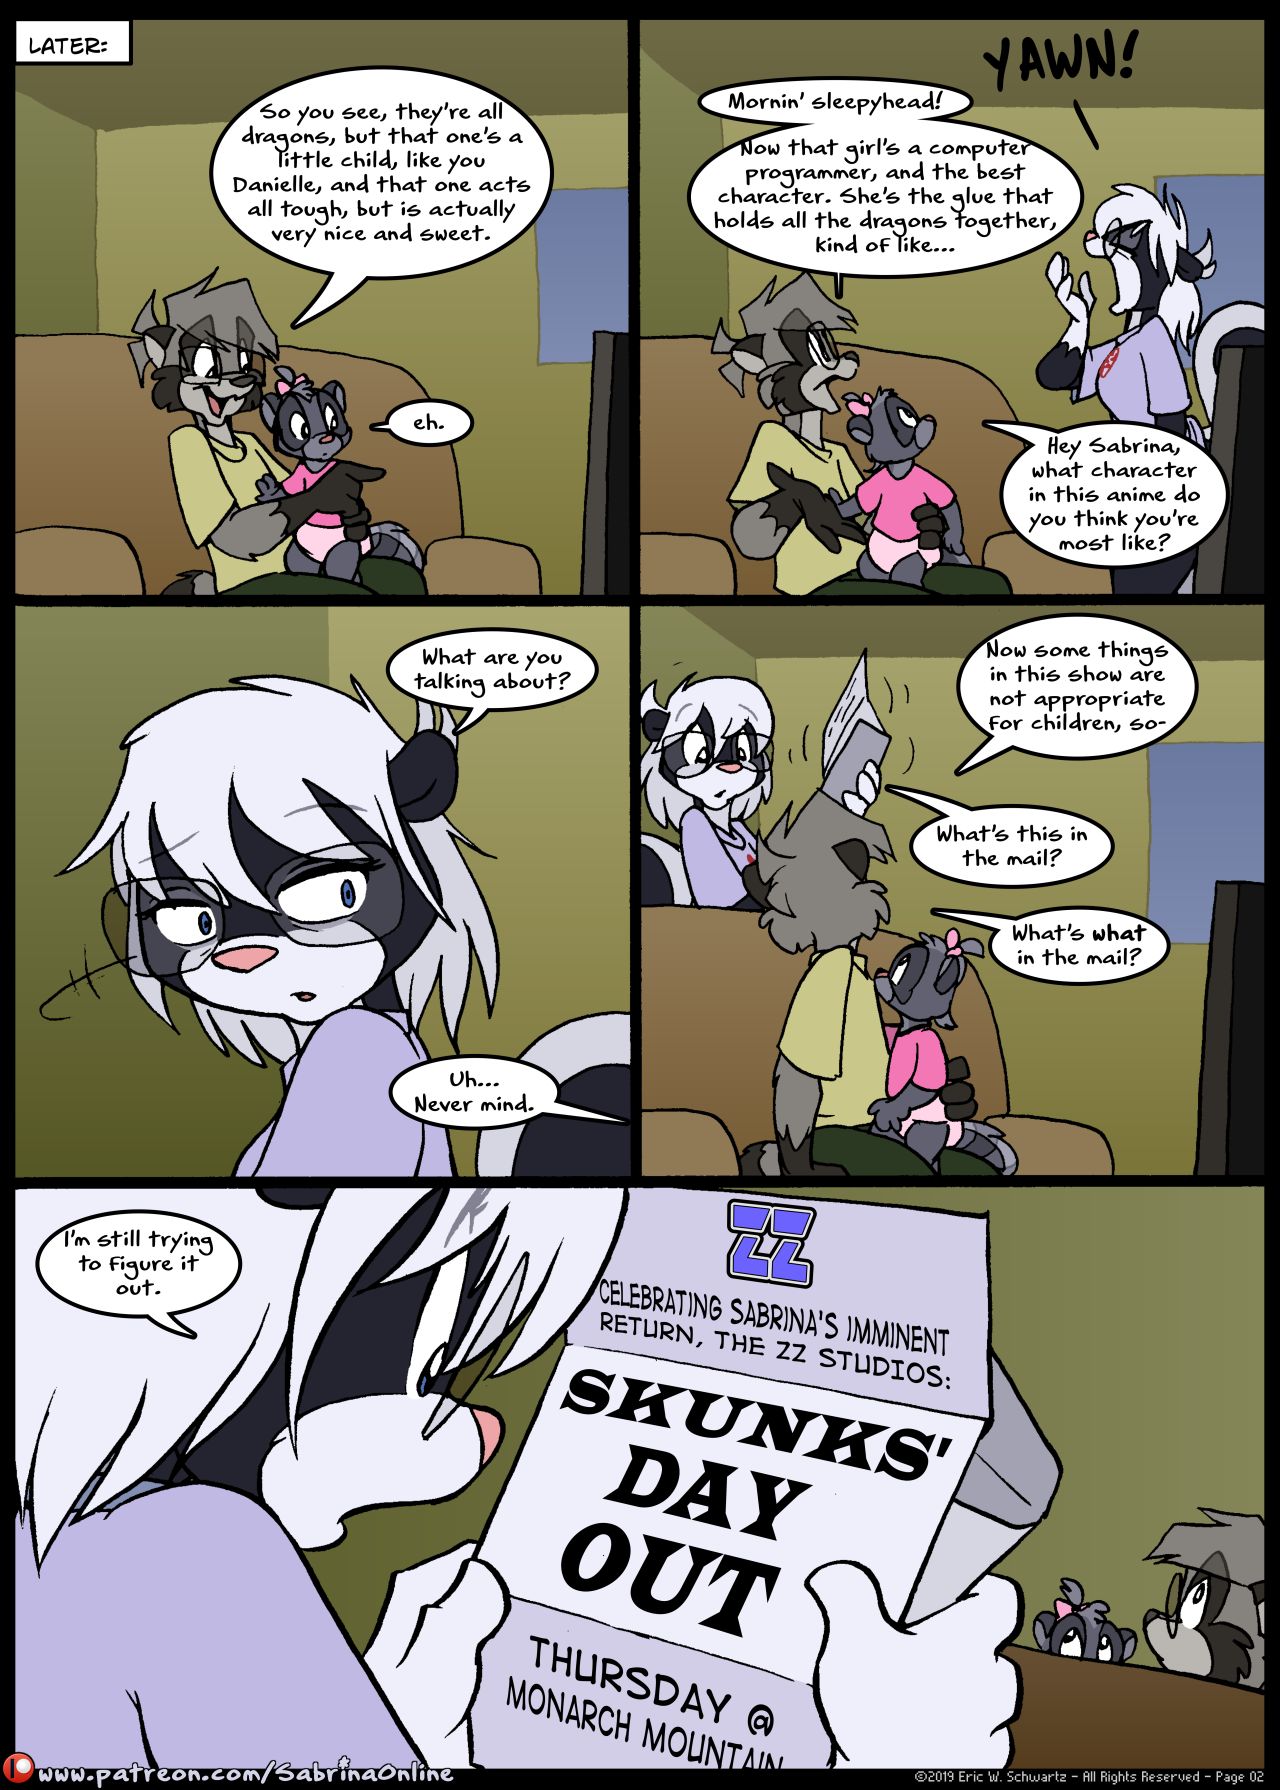 [Eric W. Schwartz] Sabrina Online: Skunks' Day Out (Ongoing) 2